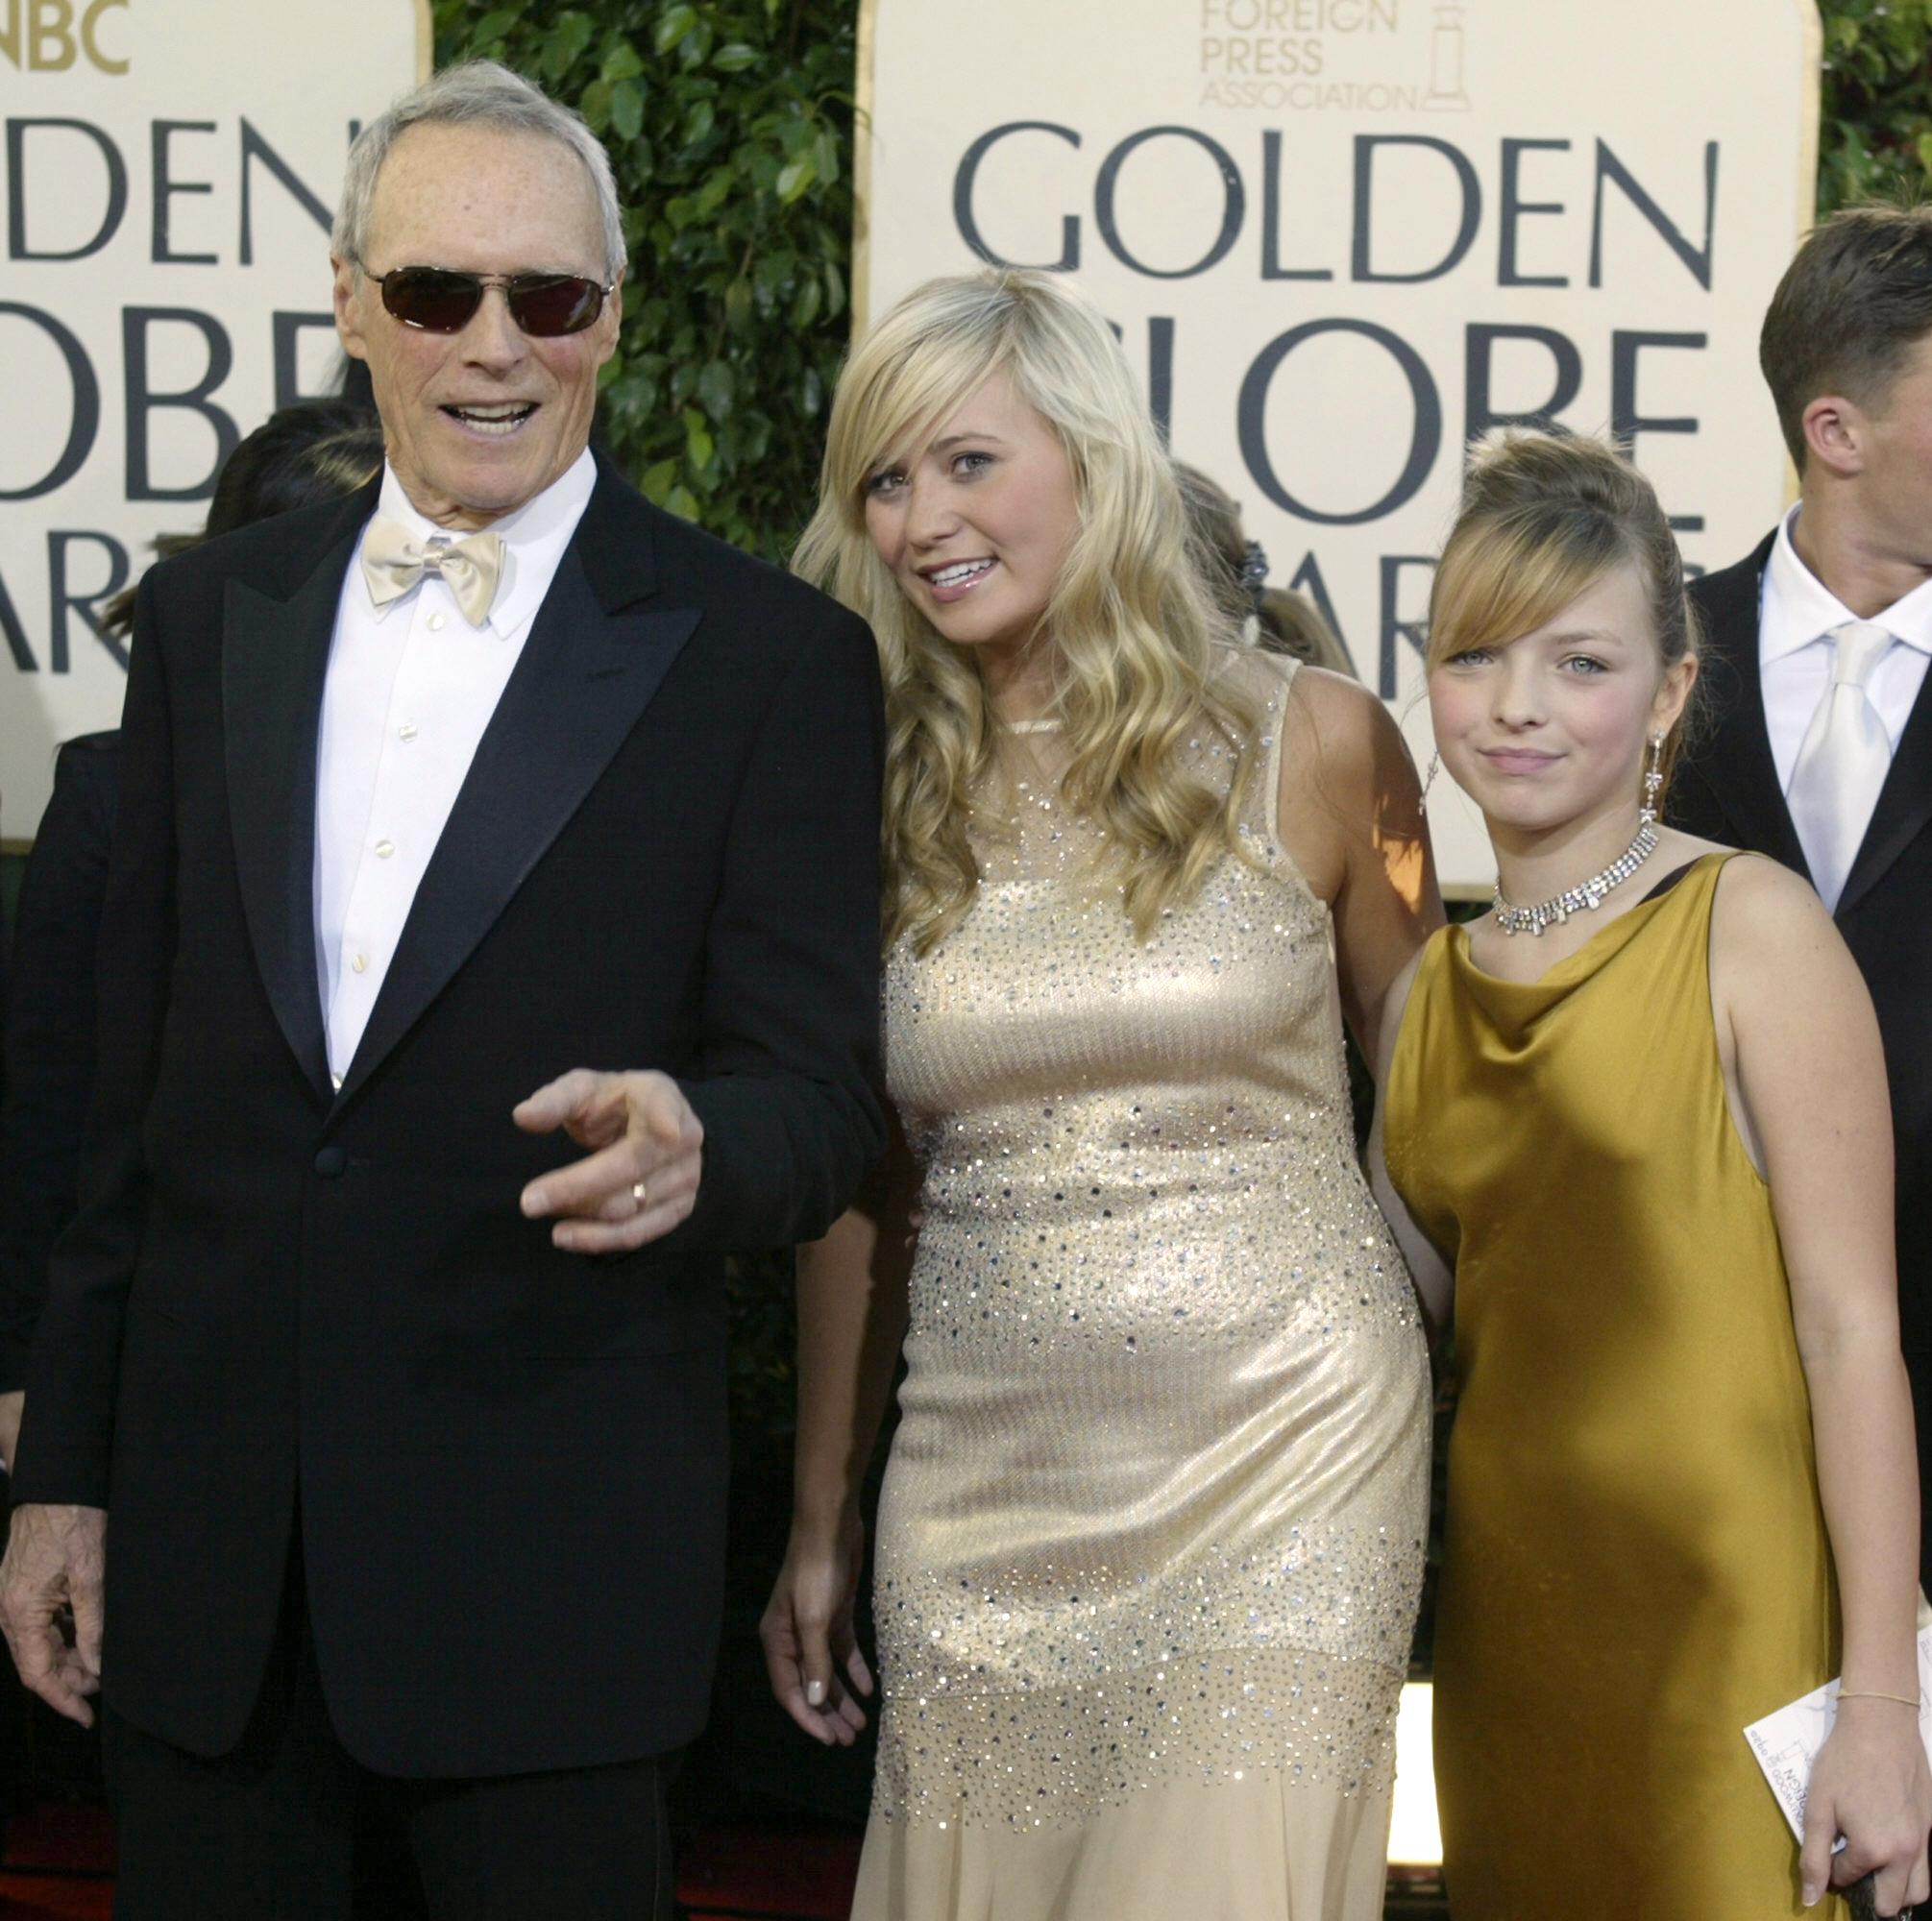 Clint Eastwood with Alison and Kathryn Eastwood at the 62nd annual Golden Globe Awards show on January 16, 2005, in Beverly Hill. | Source: Getty Images